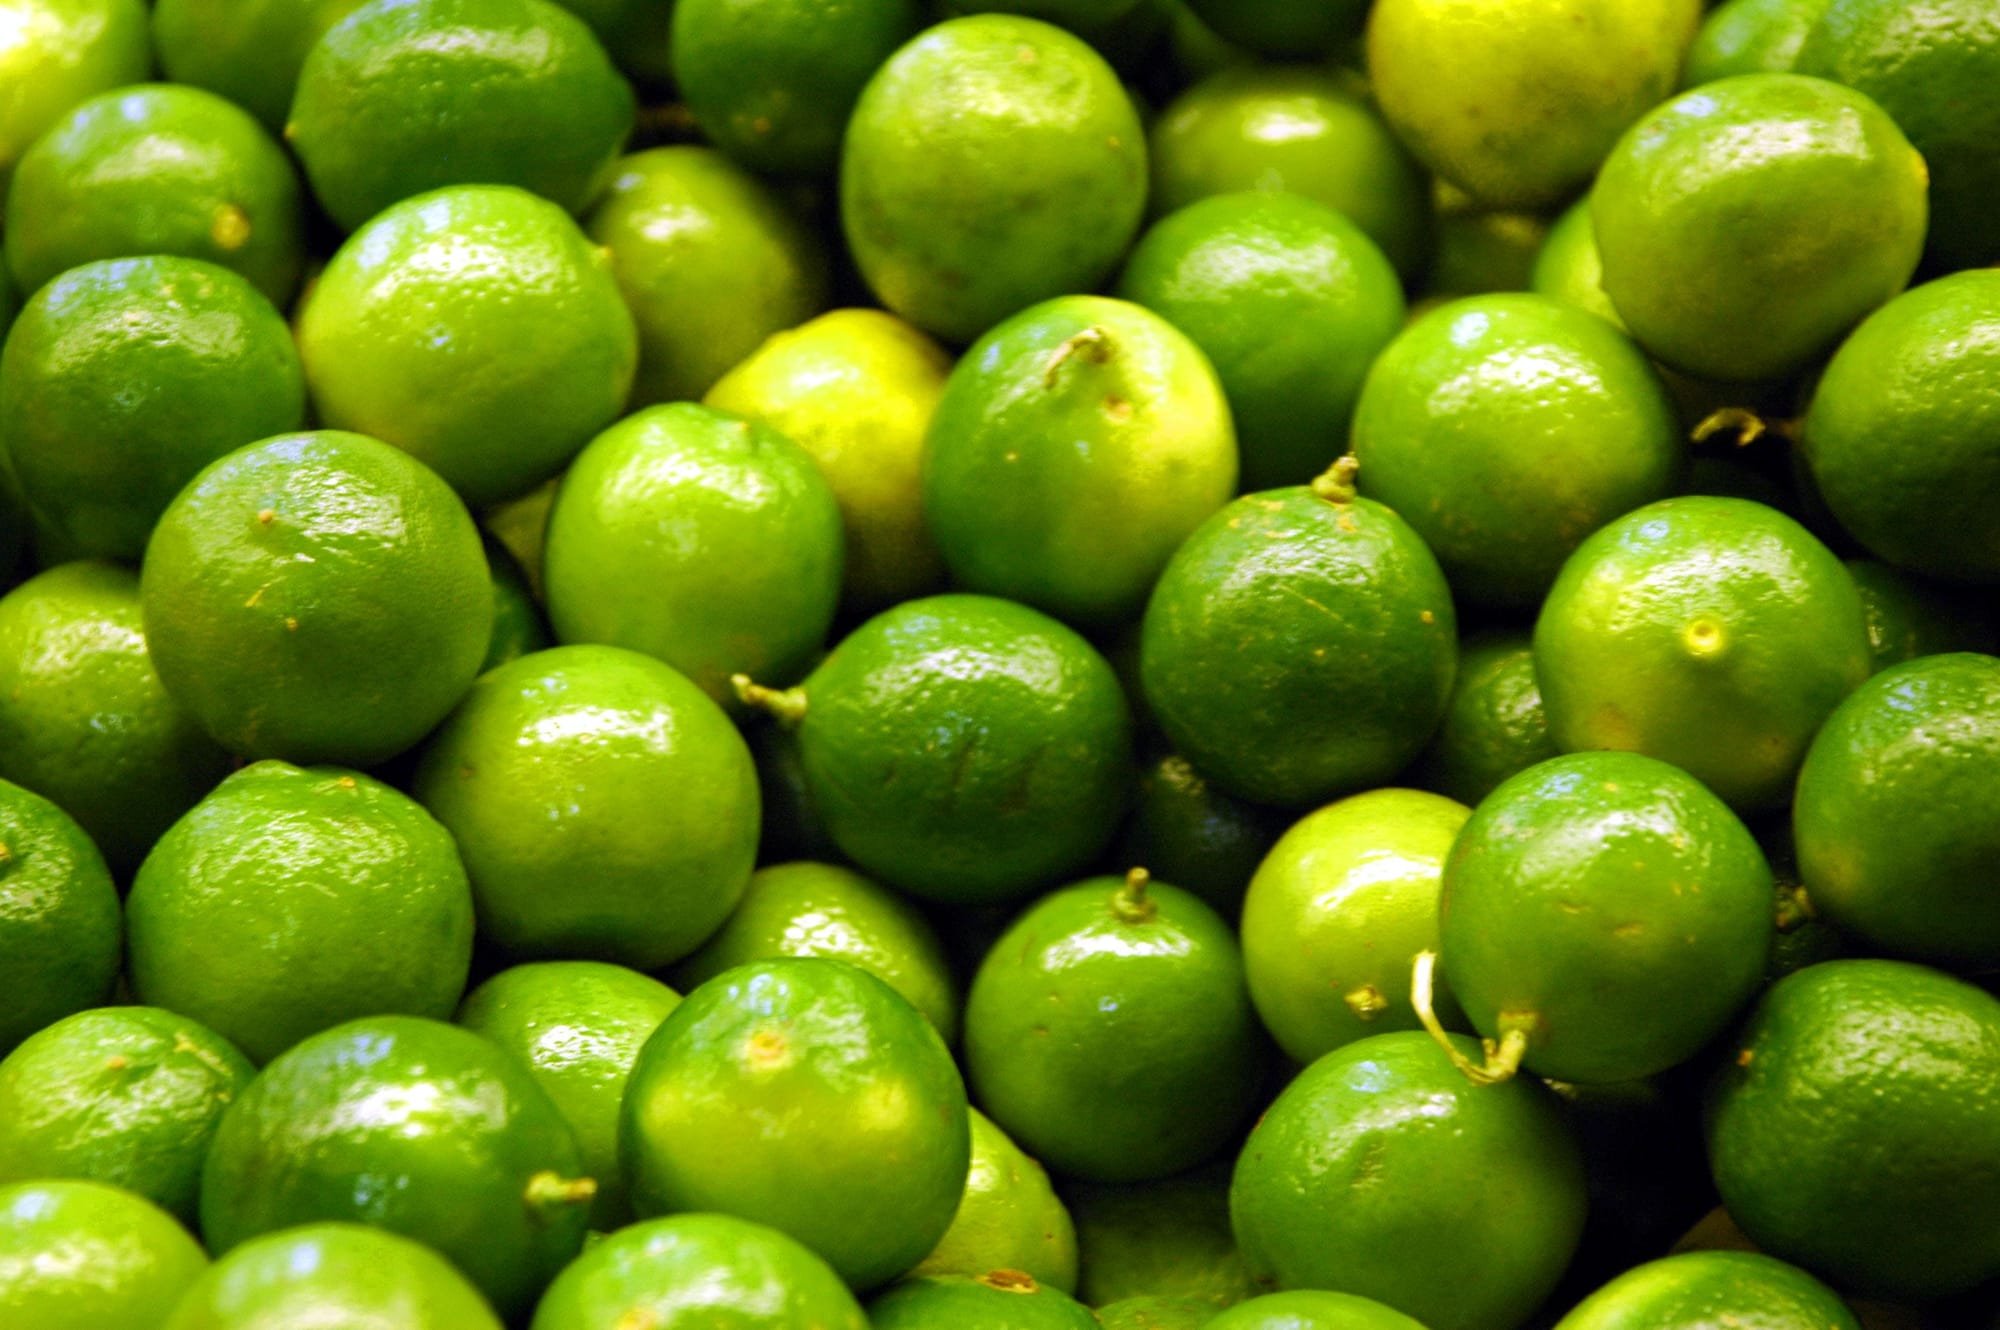 Lime- Sour yet valuable- Home remedies